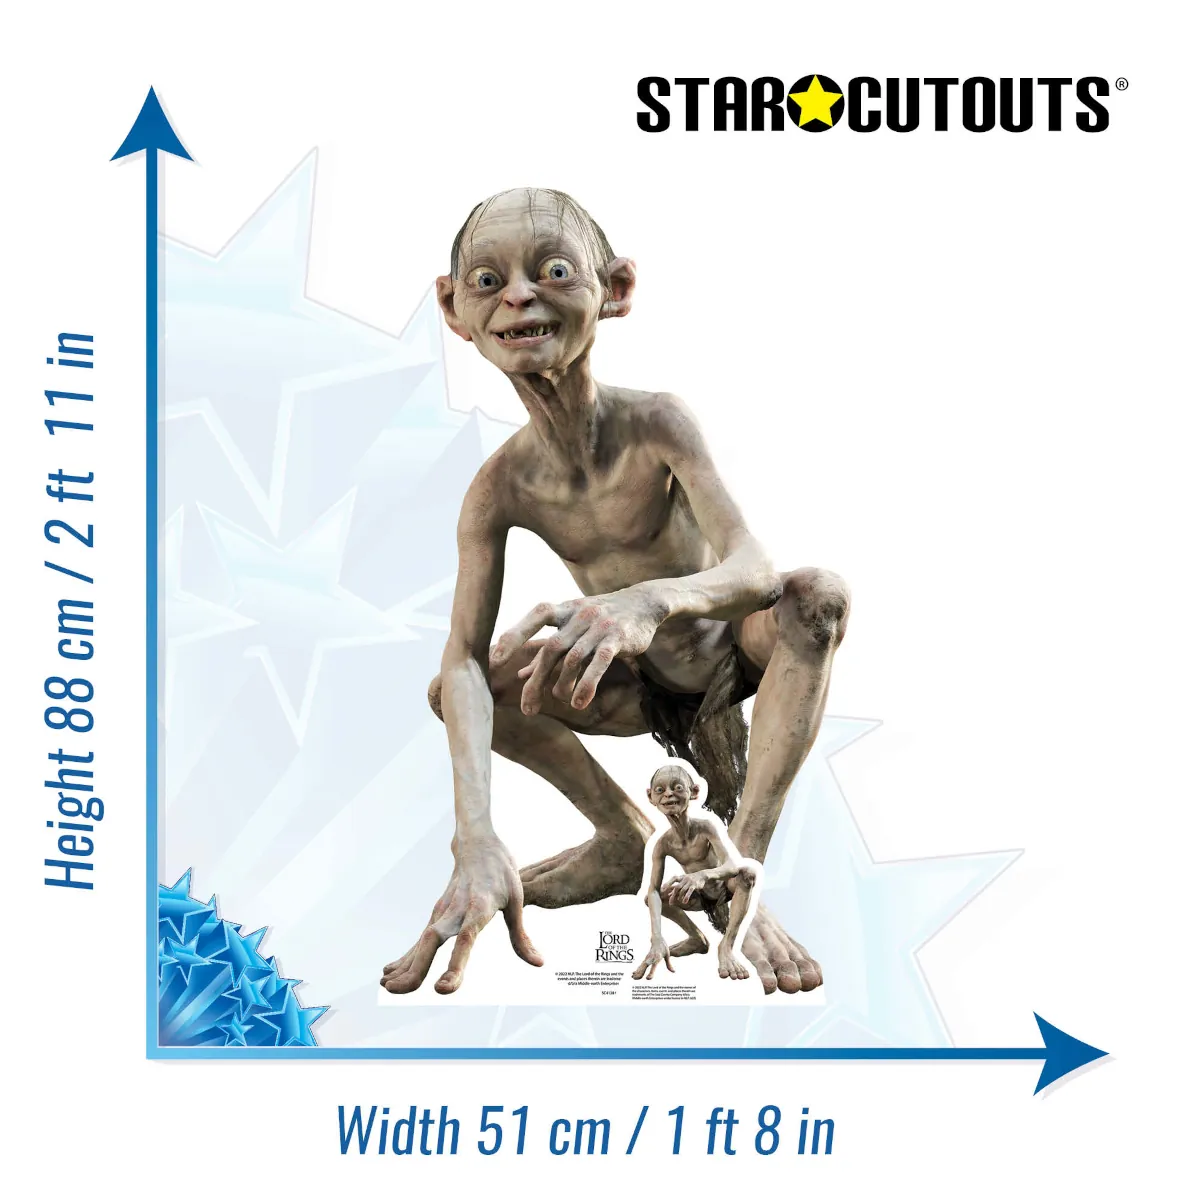 SC4128 Gollum (The Lord of the Rings) Official Lifesize + Mini Cardboard Cutout Standee Size